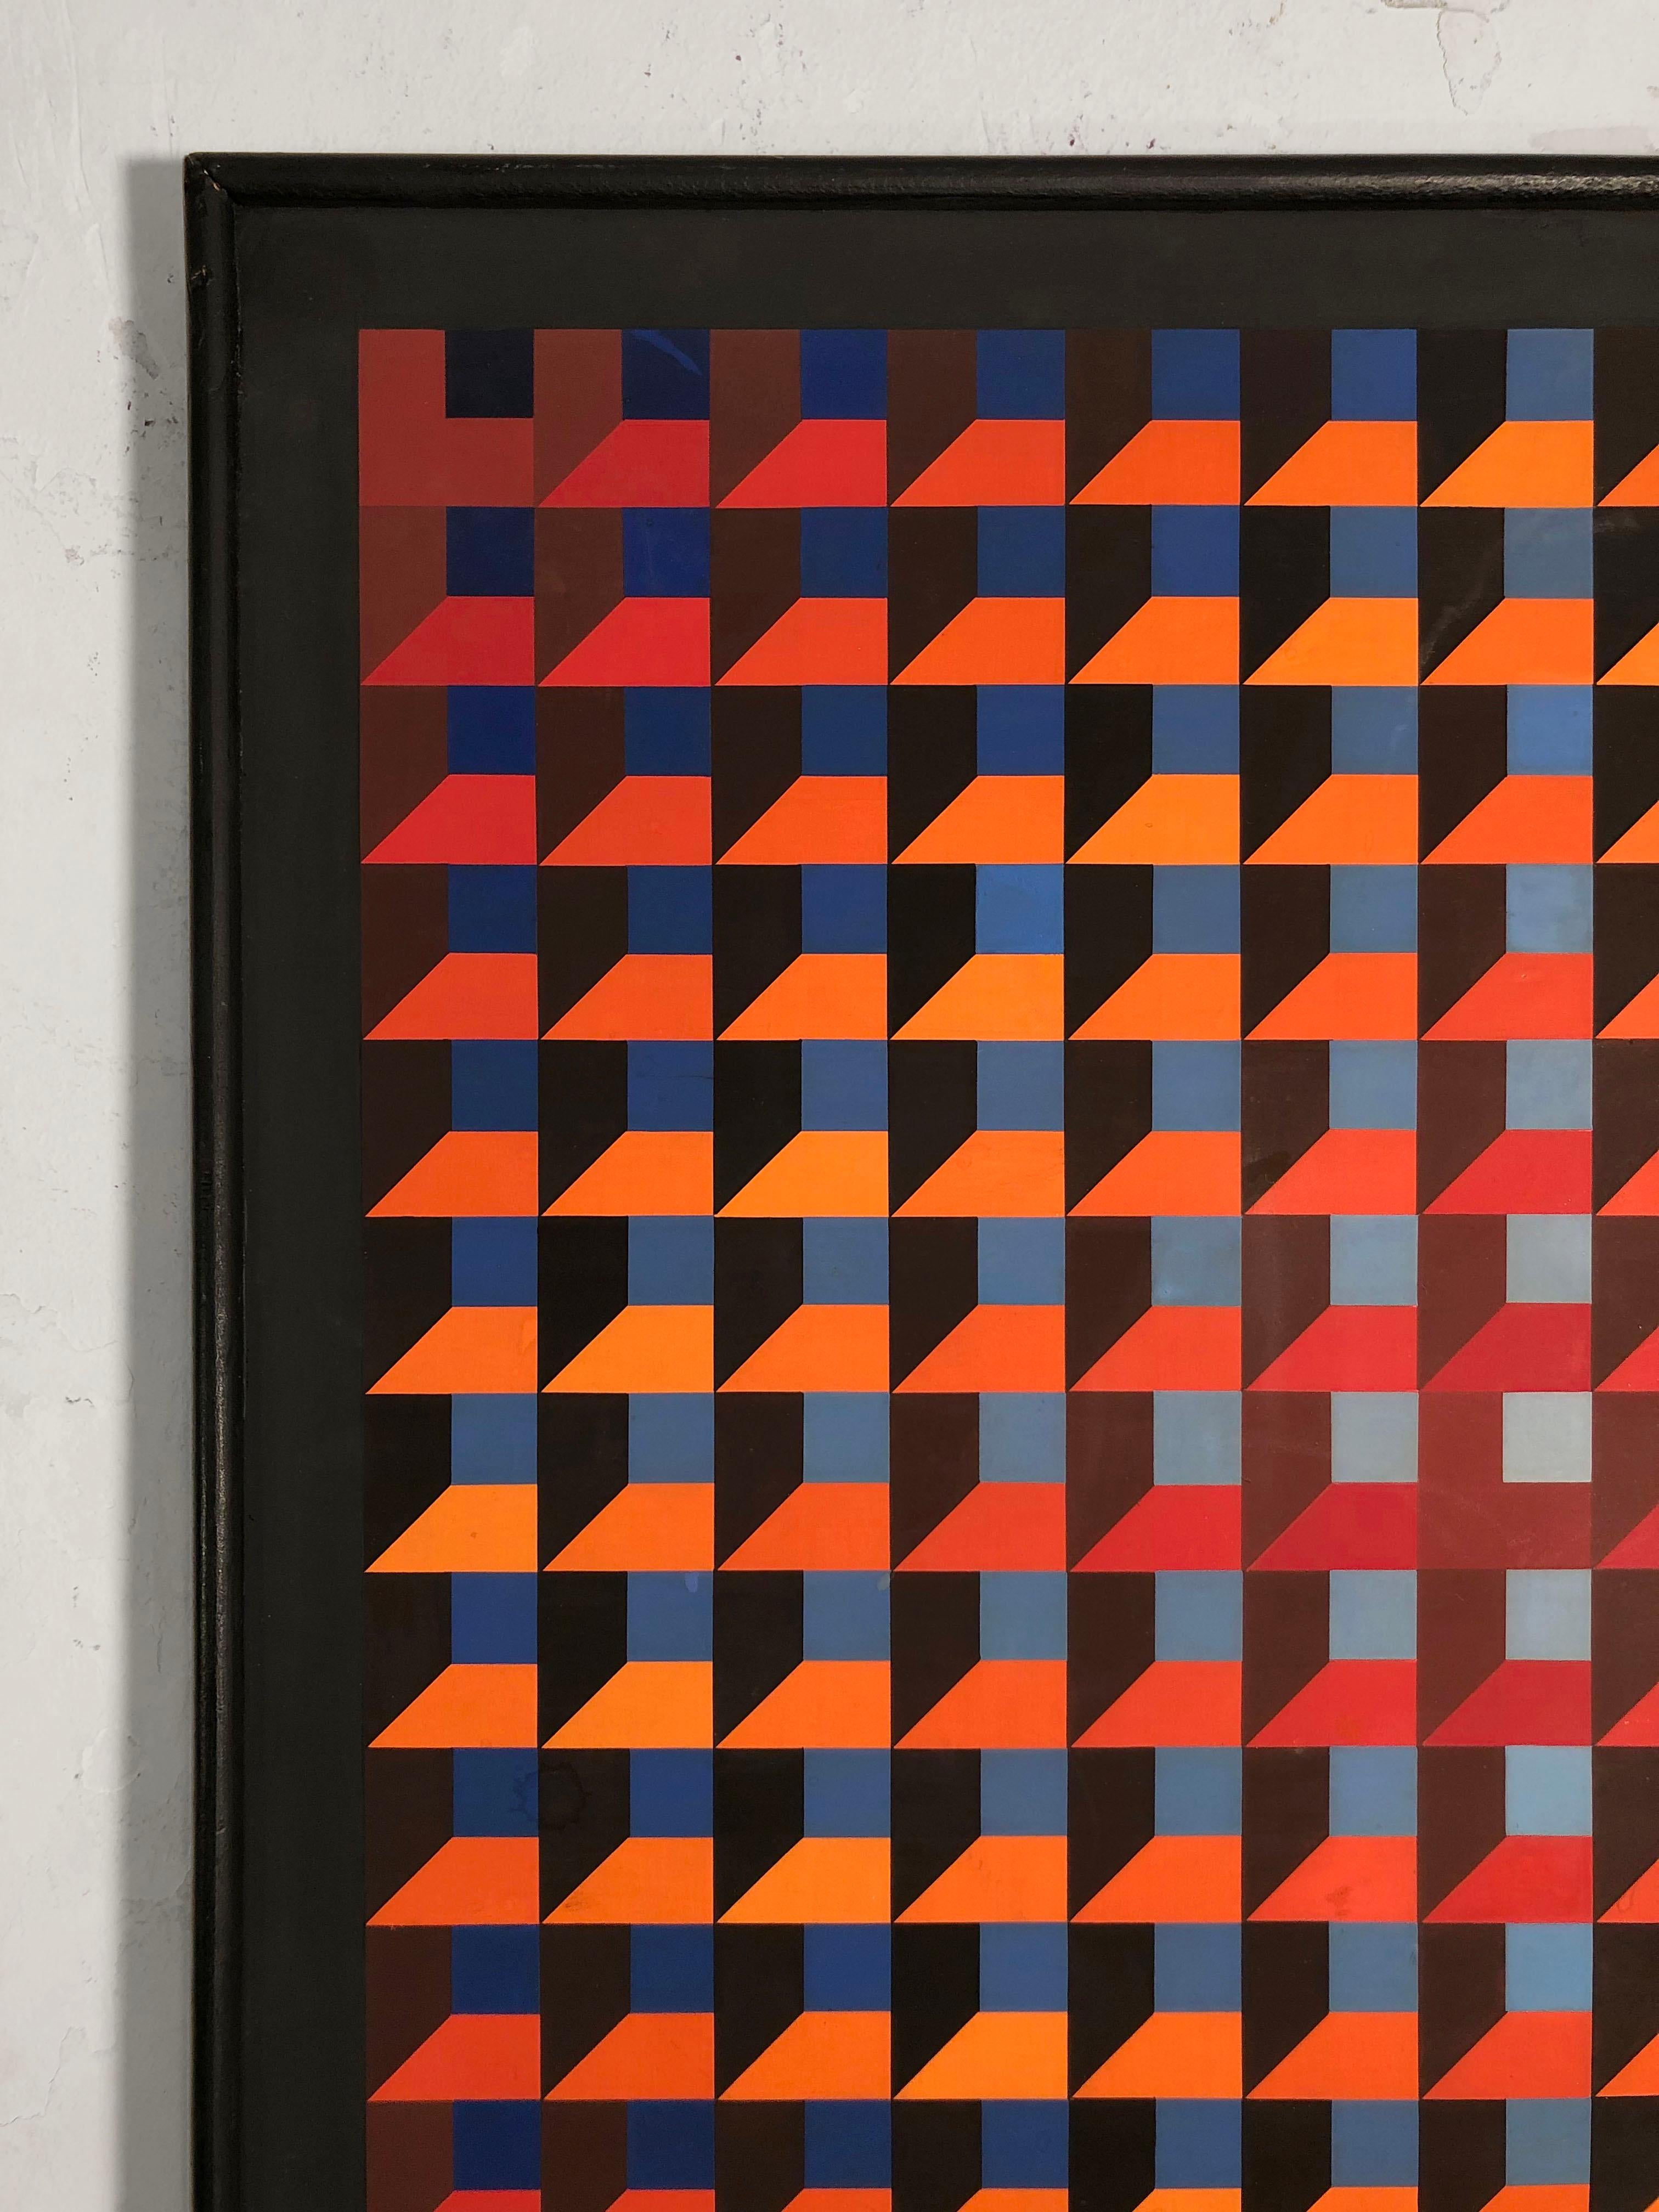 Mid-20th Century An OP-ART KINETIC PAINTING on Panel by JEAN-PIERRE YVARAL VASARELY, France 1968 For Sale